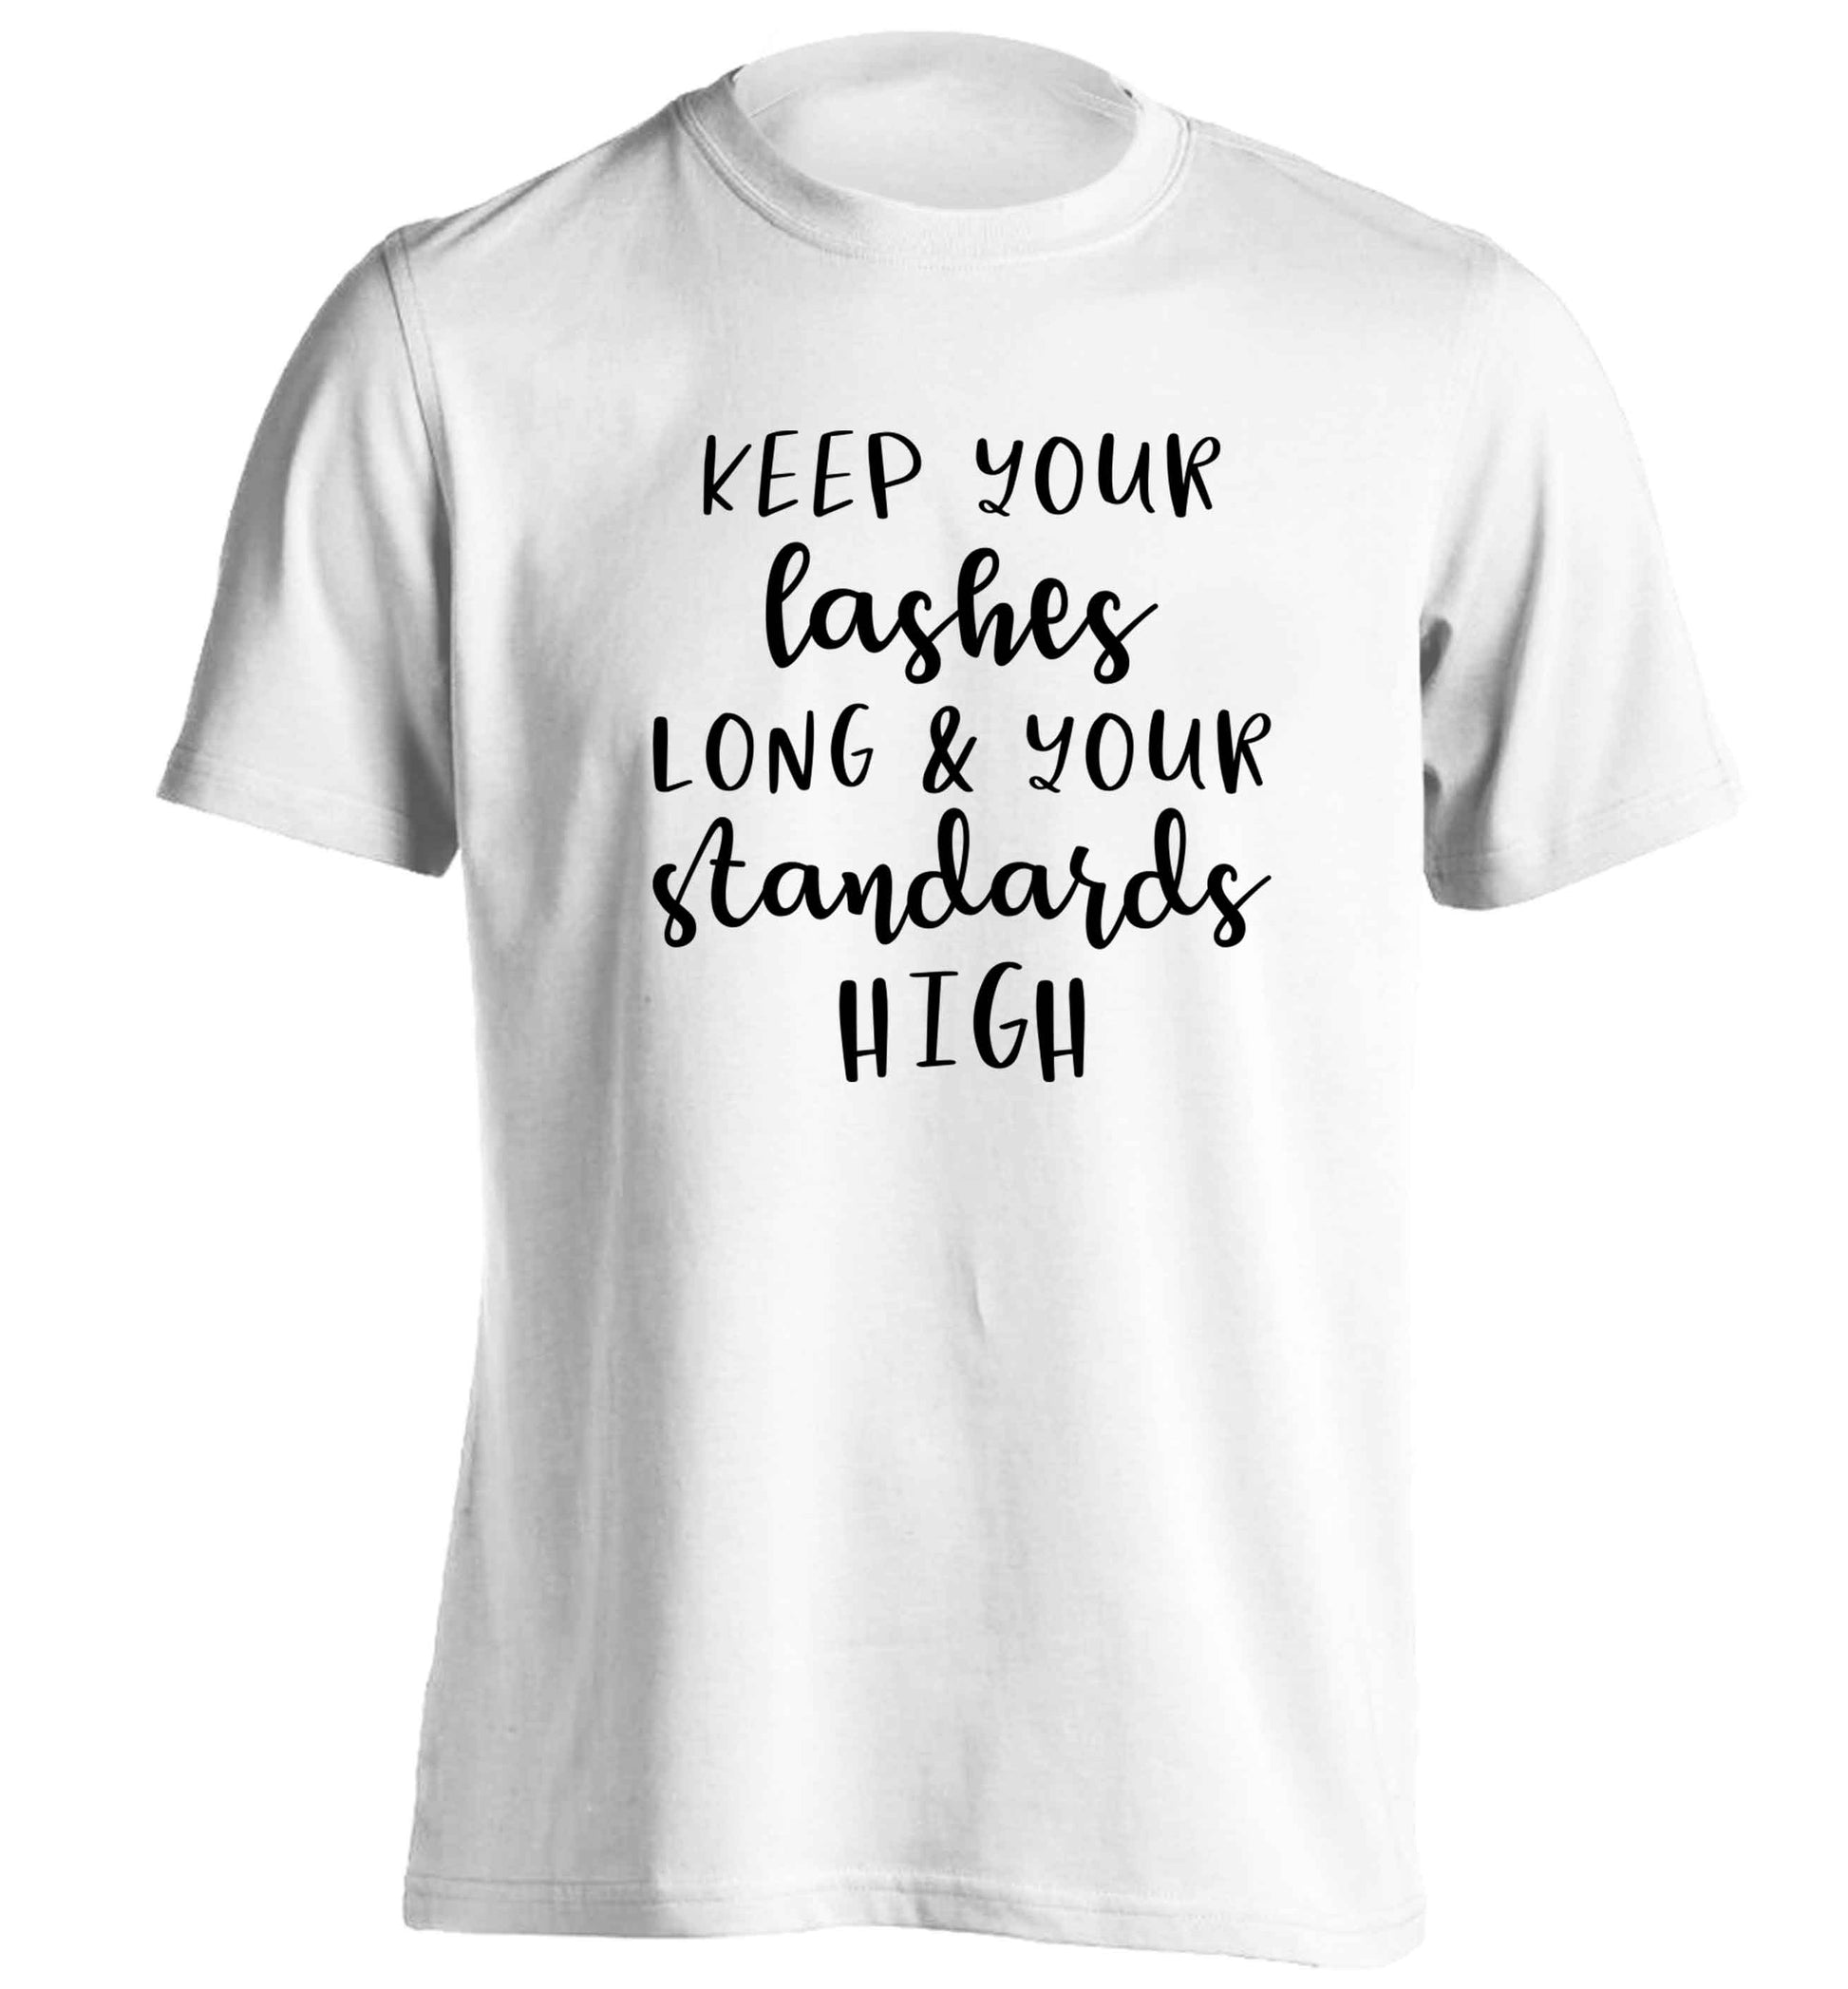 Keep your lashes long and your standards high adults unisex white Tshirt 2XL